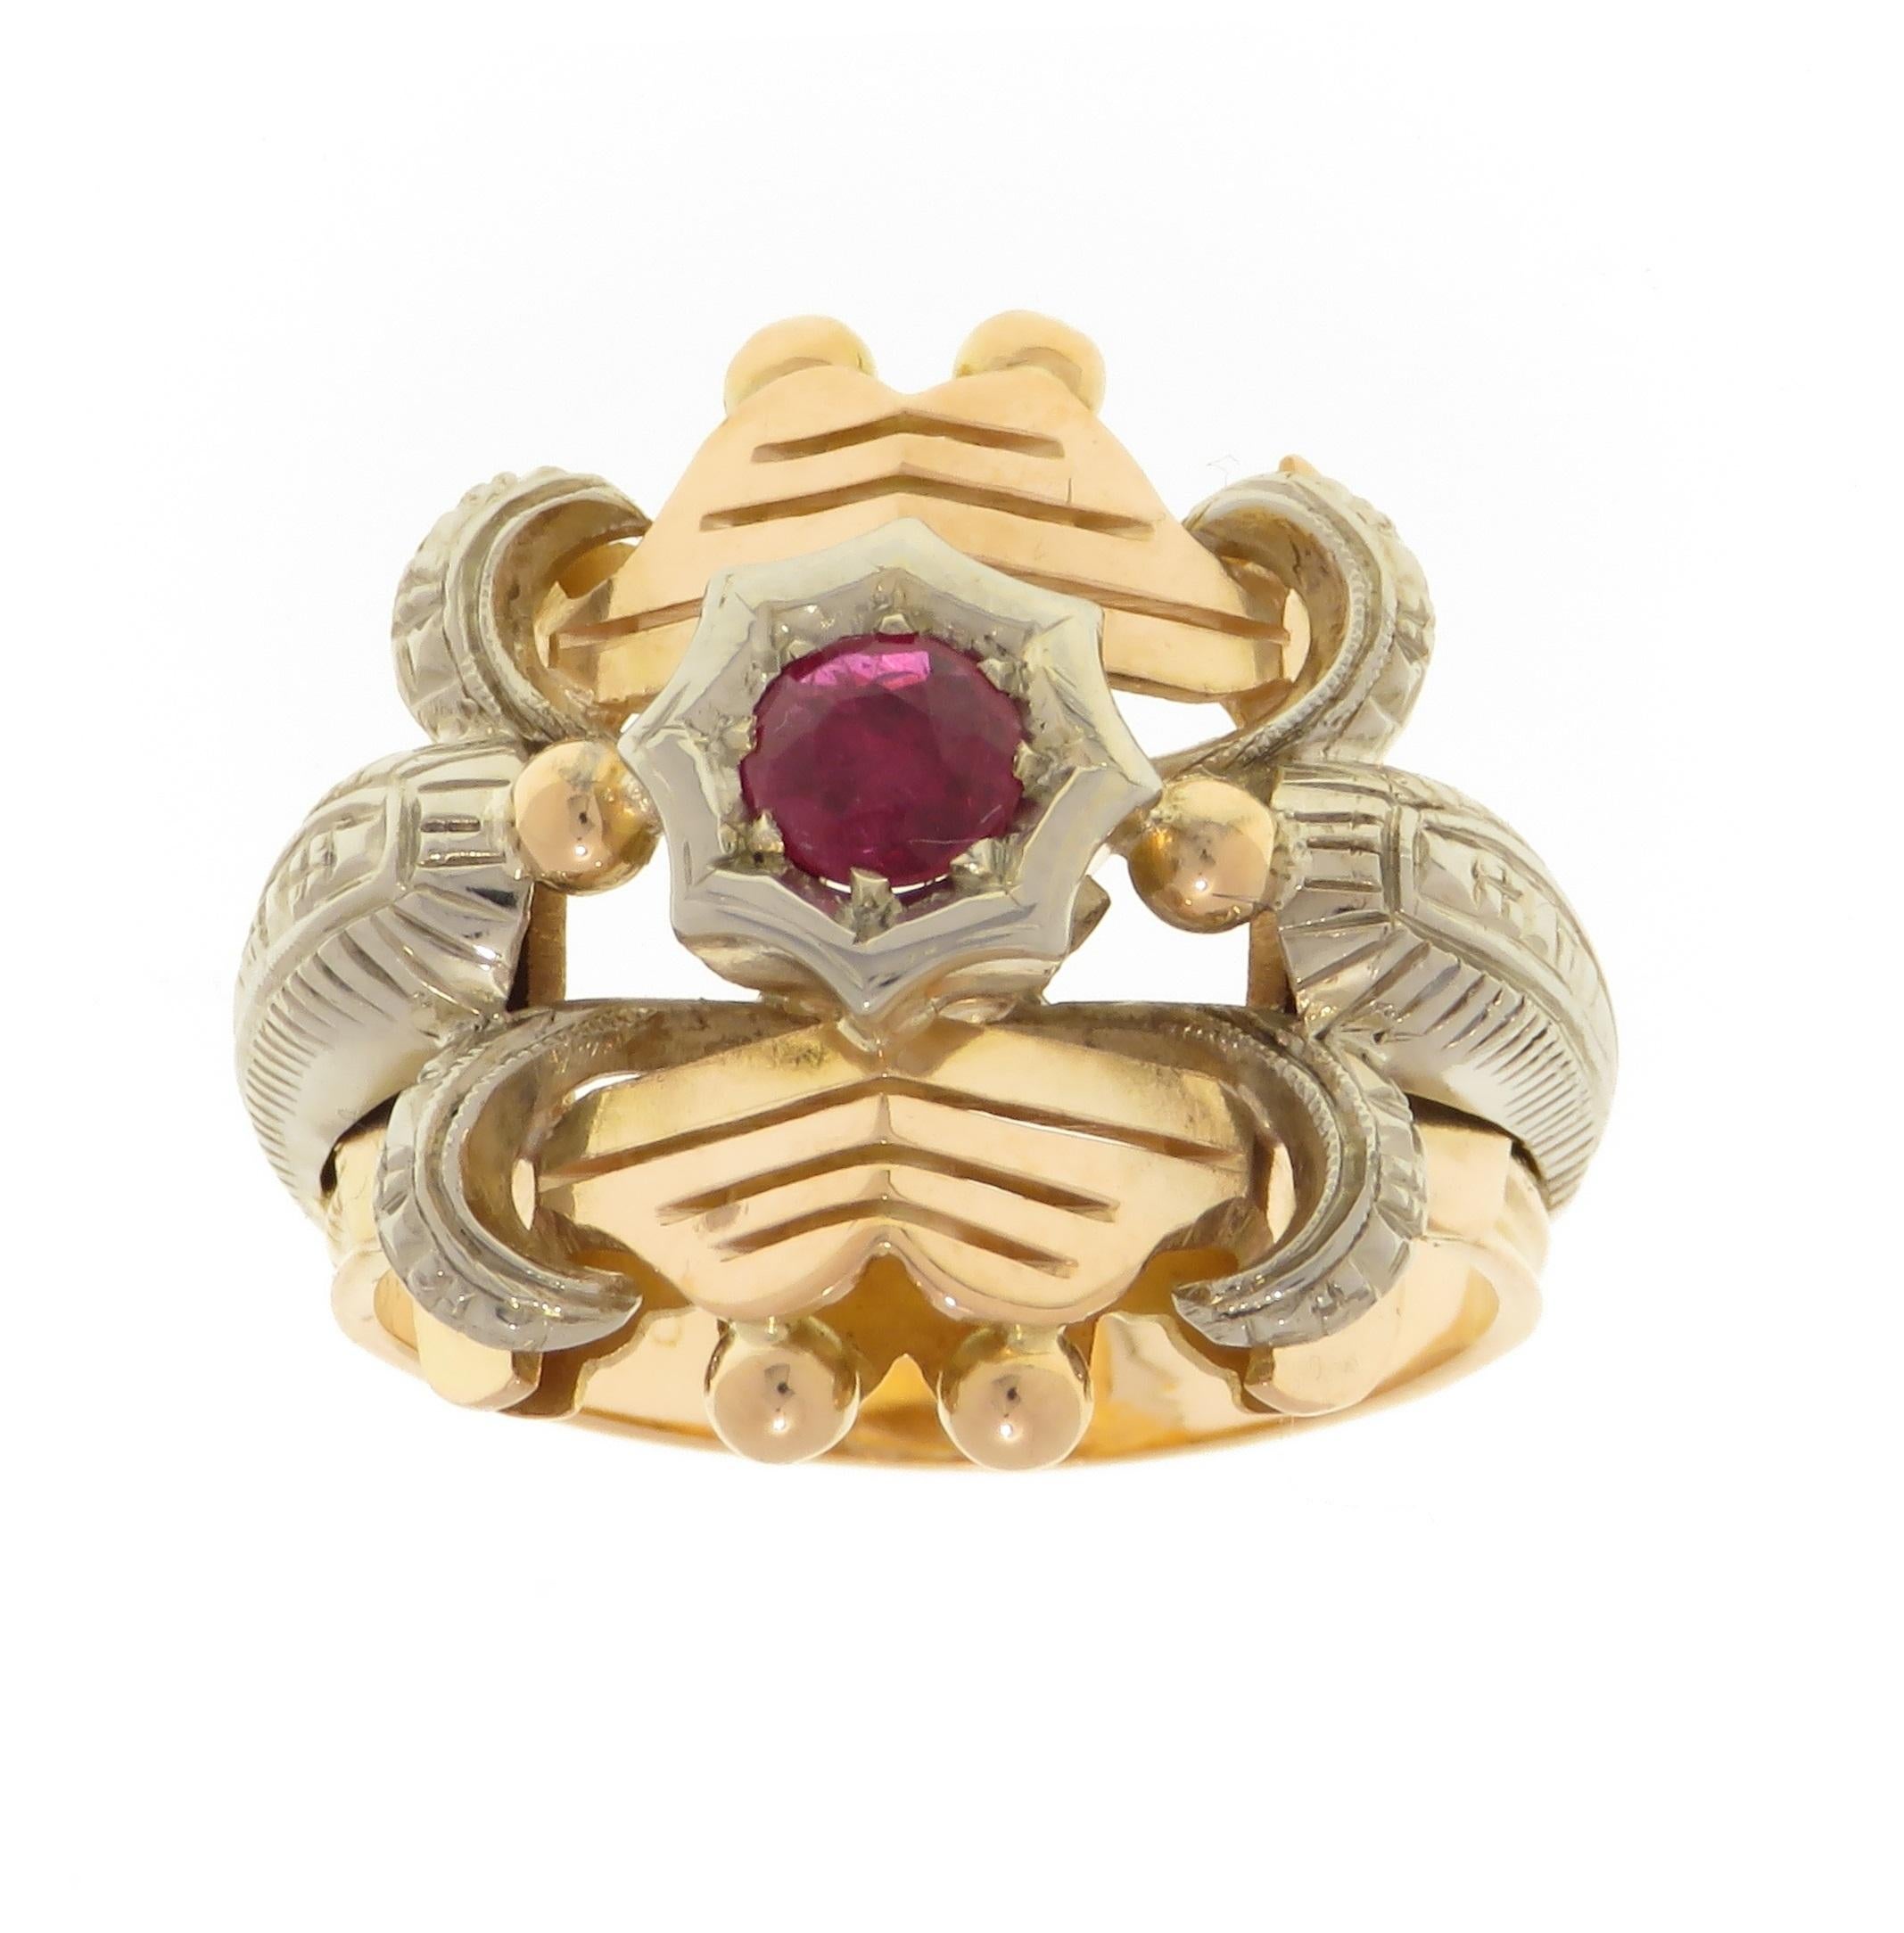 Lovely antique engraved ring dating back to the 1960' with a natural brilliant cut ruby set into 18 karat rose and white gold. The size of the ring is 22x20 mm / 0.866x0.787 inches. US finger size is 7 3/4, French size 57, Italian size 17, resizable